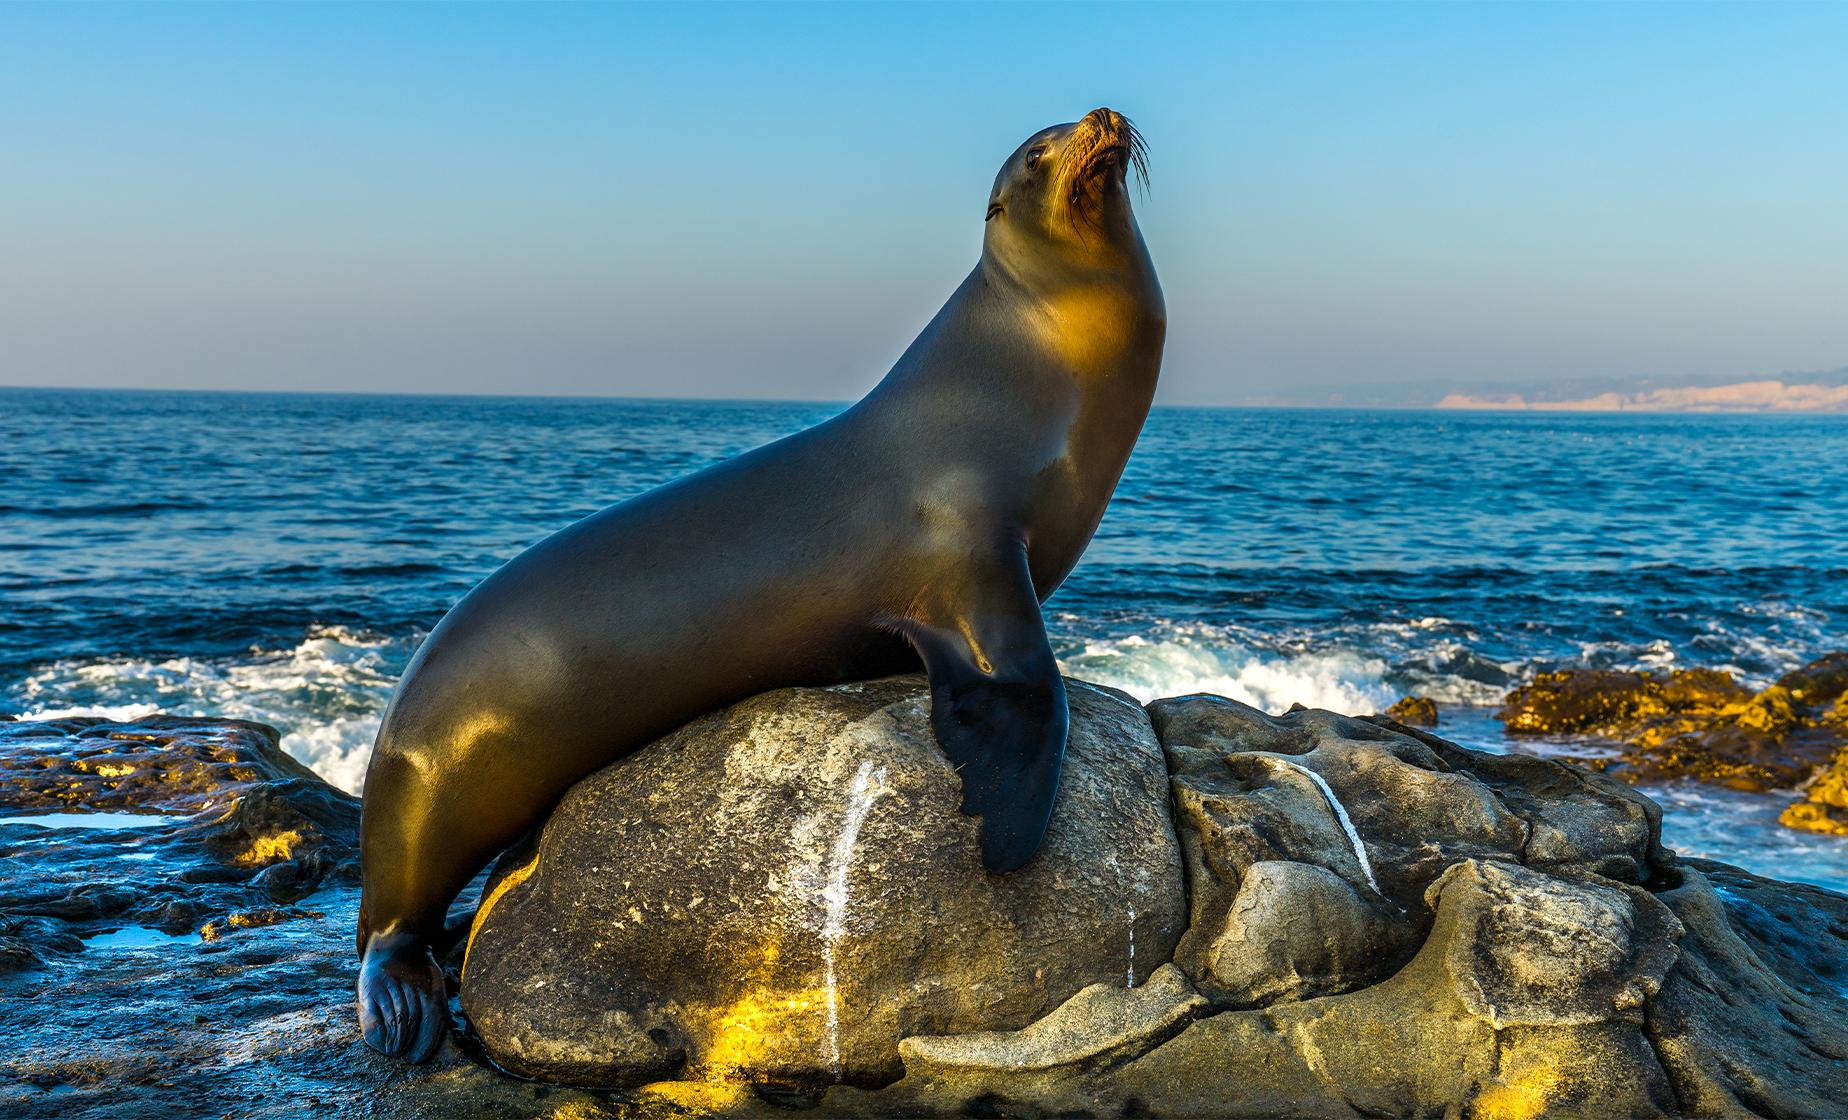 Two Hour San Diego Harbor Cruise and Sea Lion Adventure (South and North Bay)